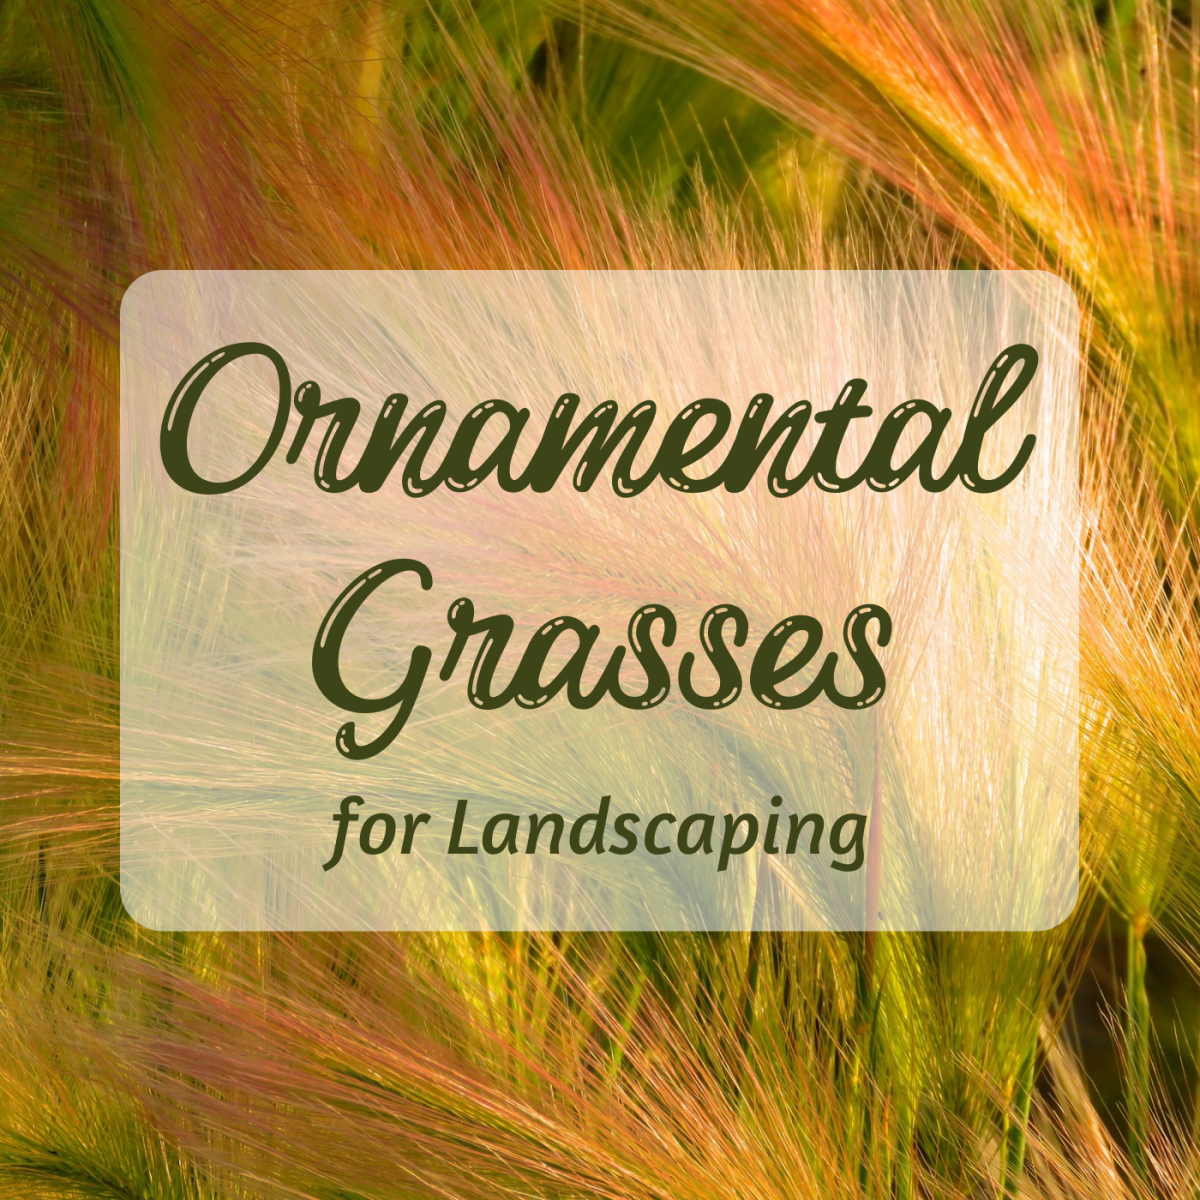 Foxtail Barley Grass and other ornamental grasses make an attractive addition to your landscape.